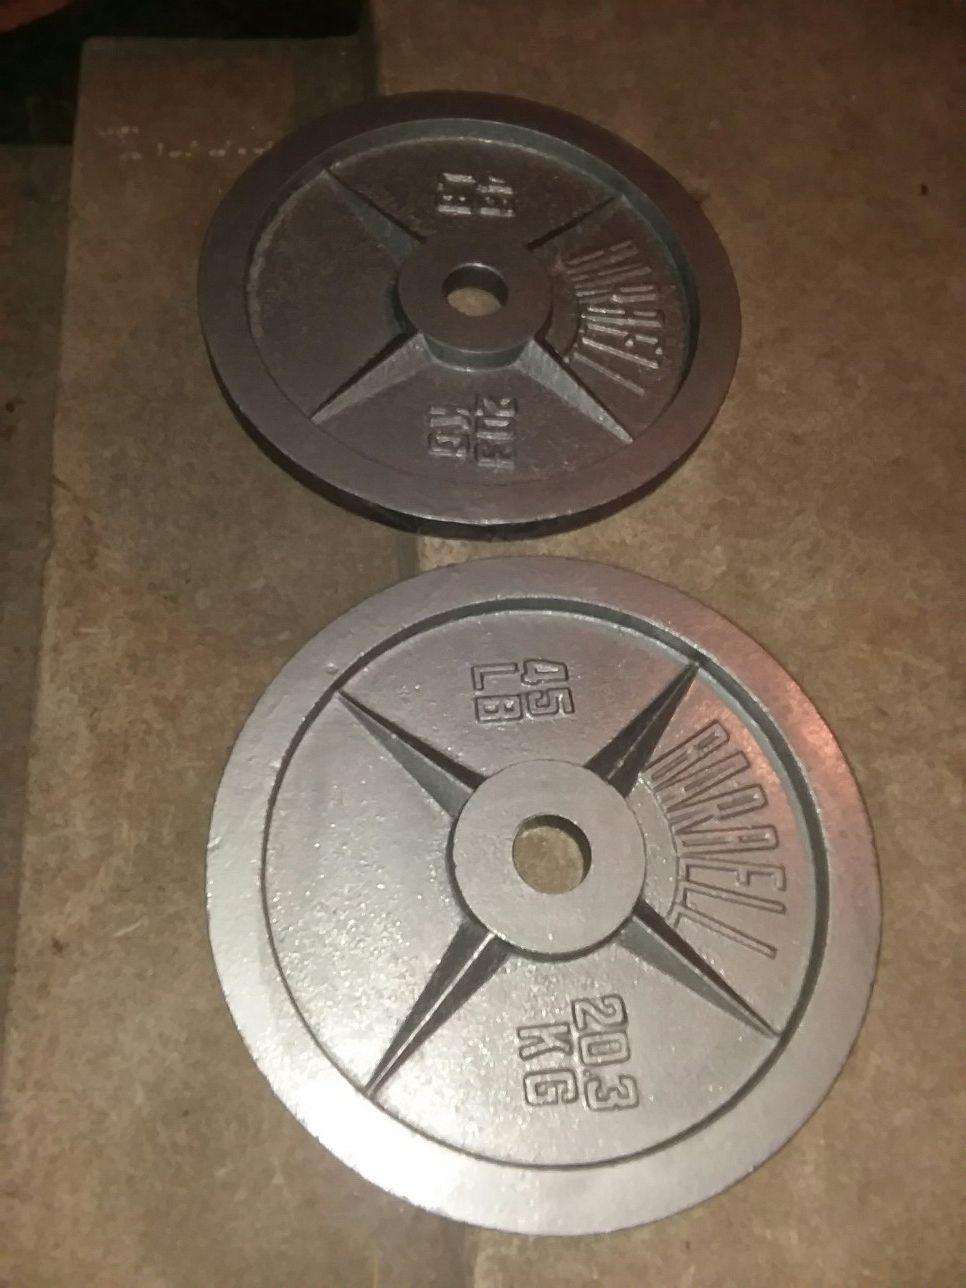 A pair of 45Lb Olympic size weight plates. $55 Firm